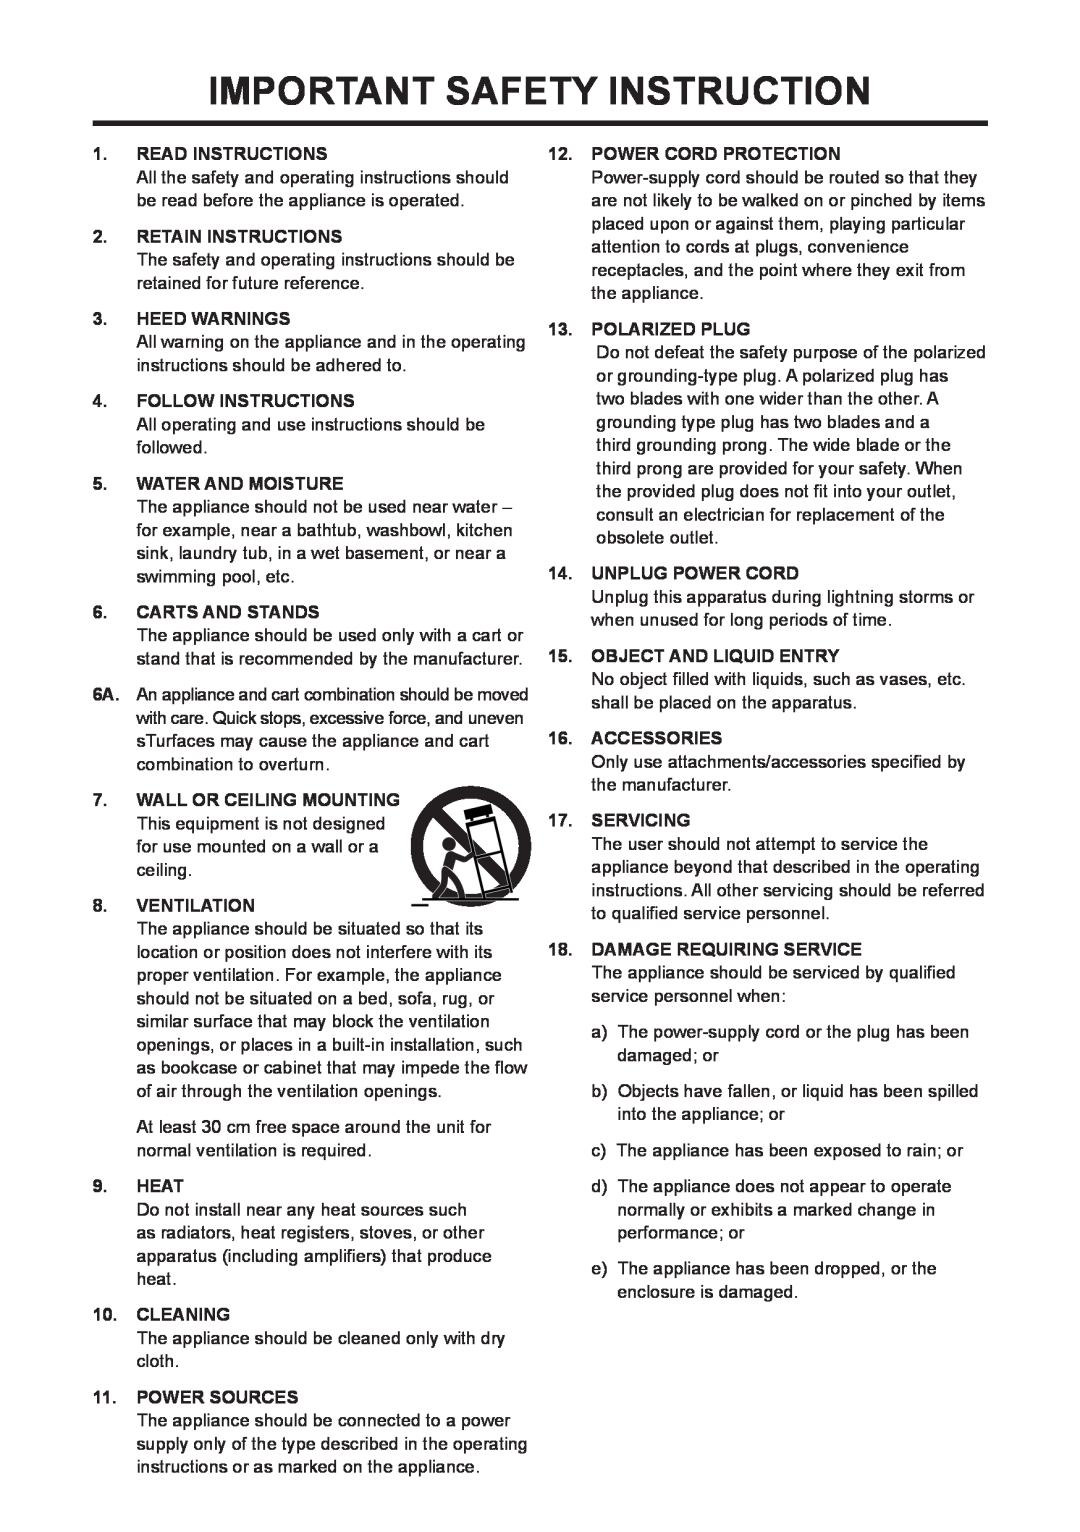 M-Audio CX8 manual Important Safety Instruction 